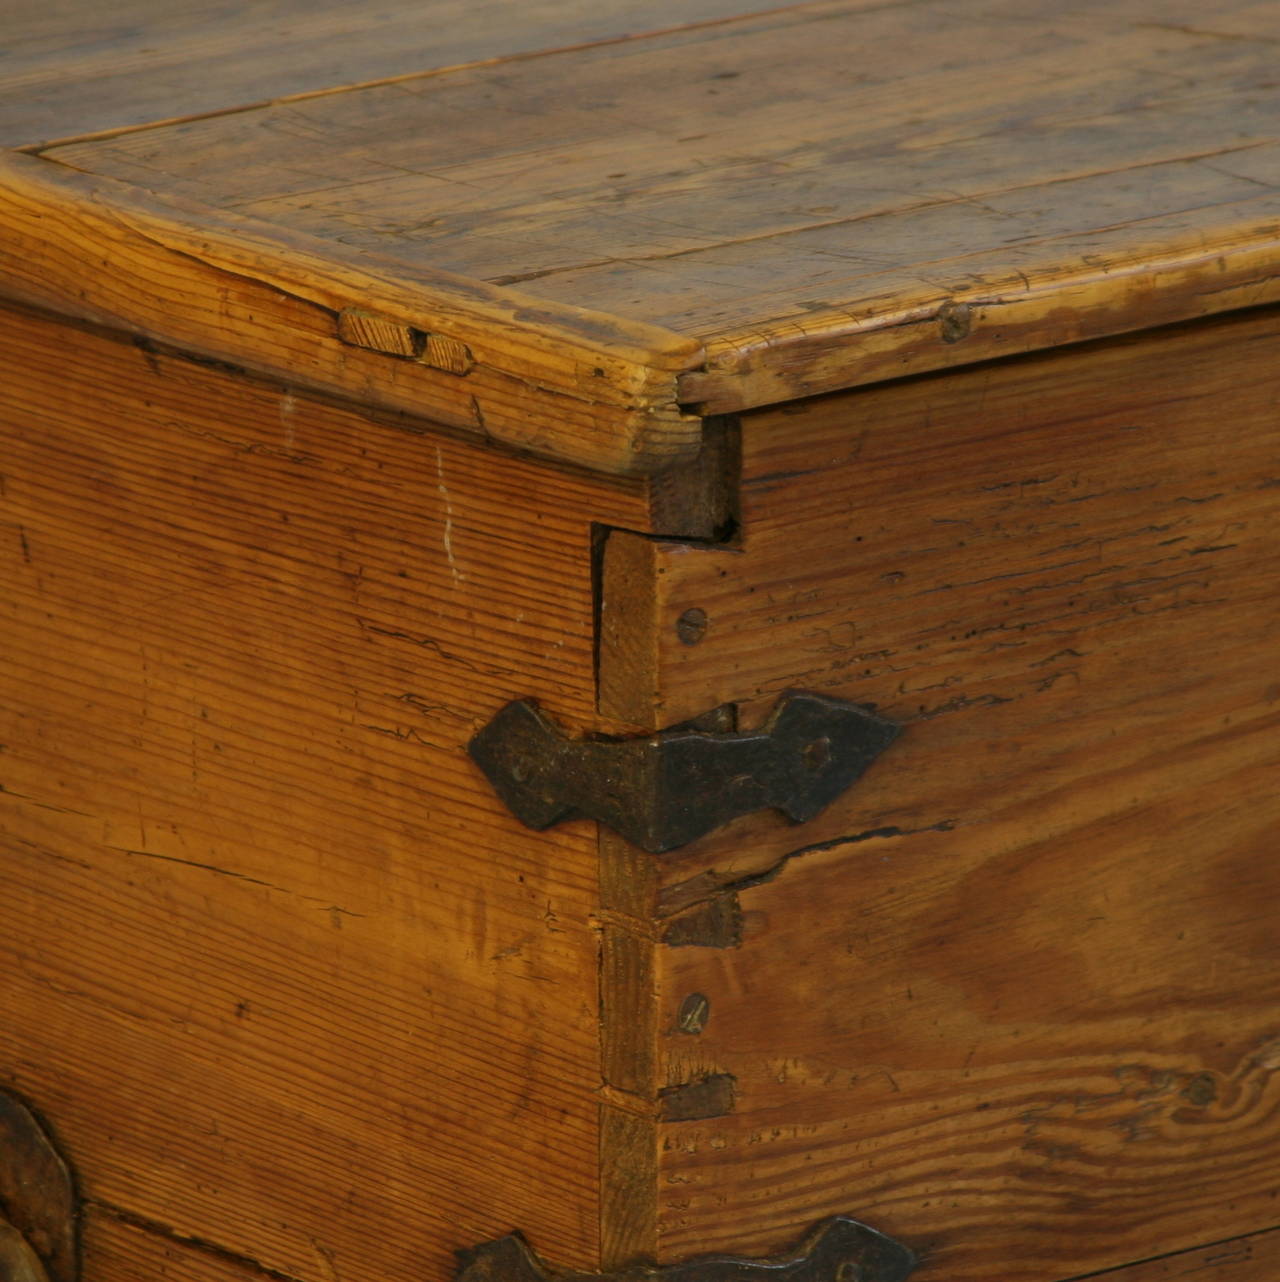 Swedish Antique Pine Trunk with Hand-Wrought Iron Details, circa 1800's